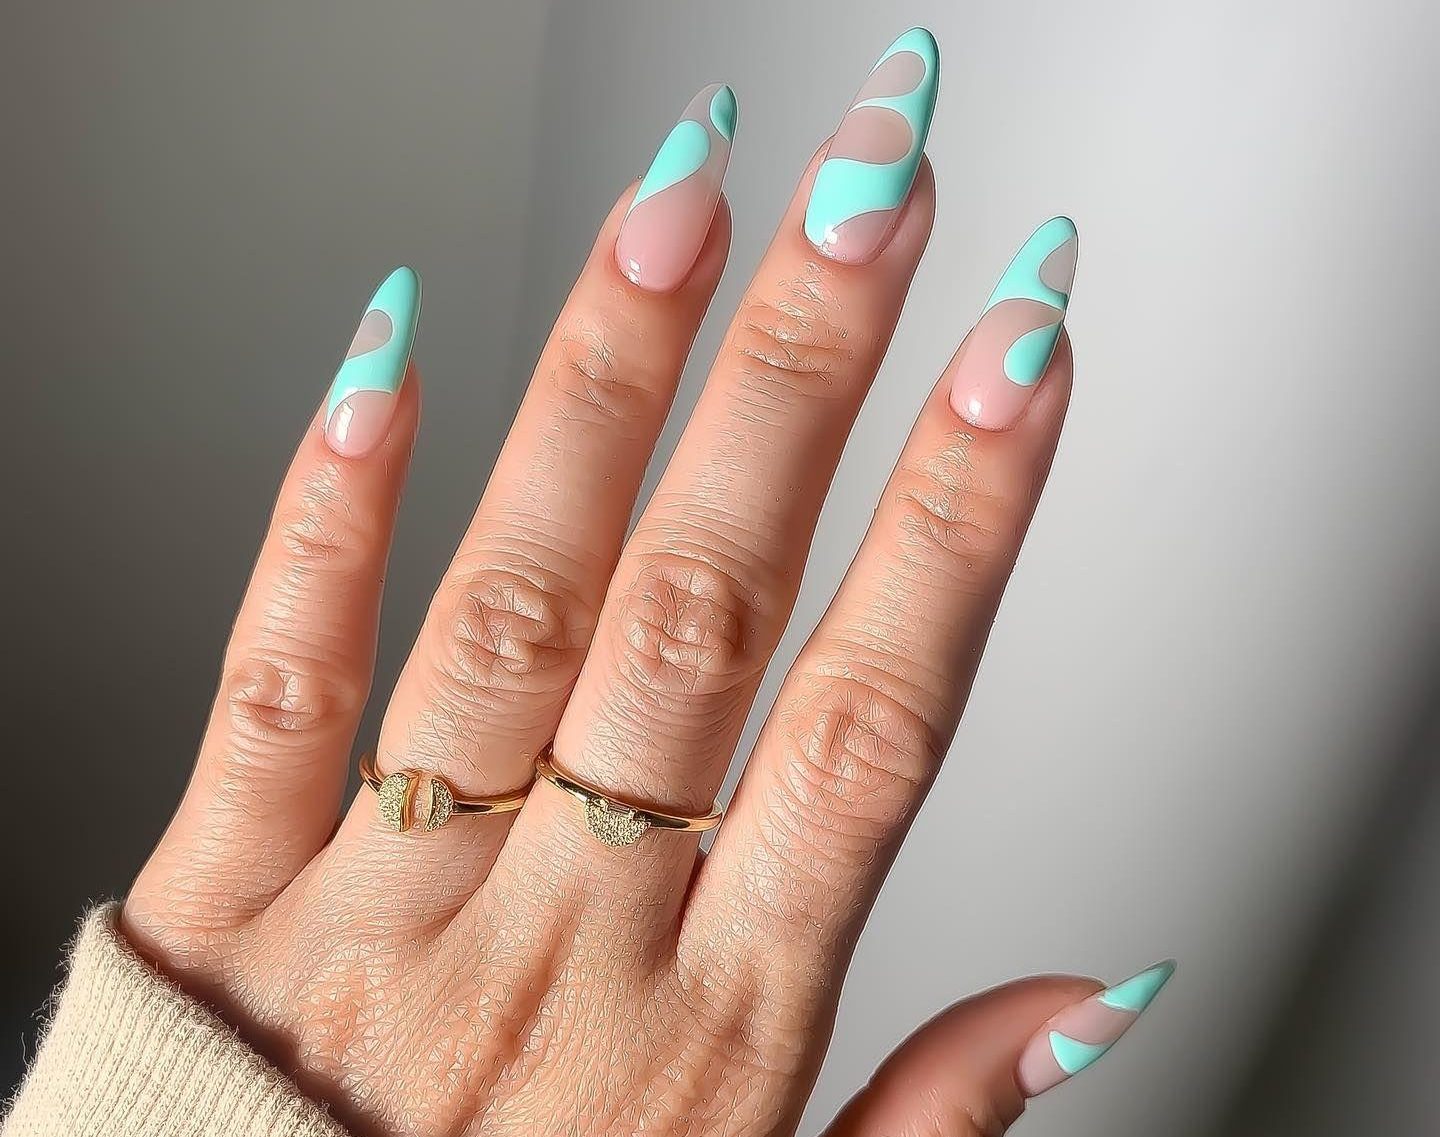 6 New Colors To Try For Your Summer Nails